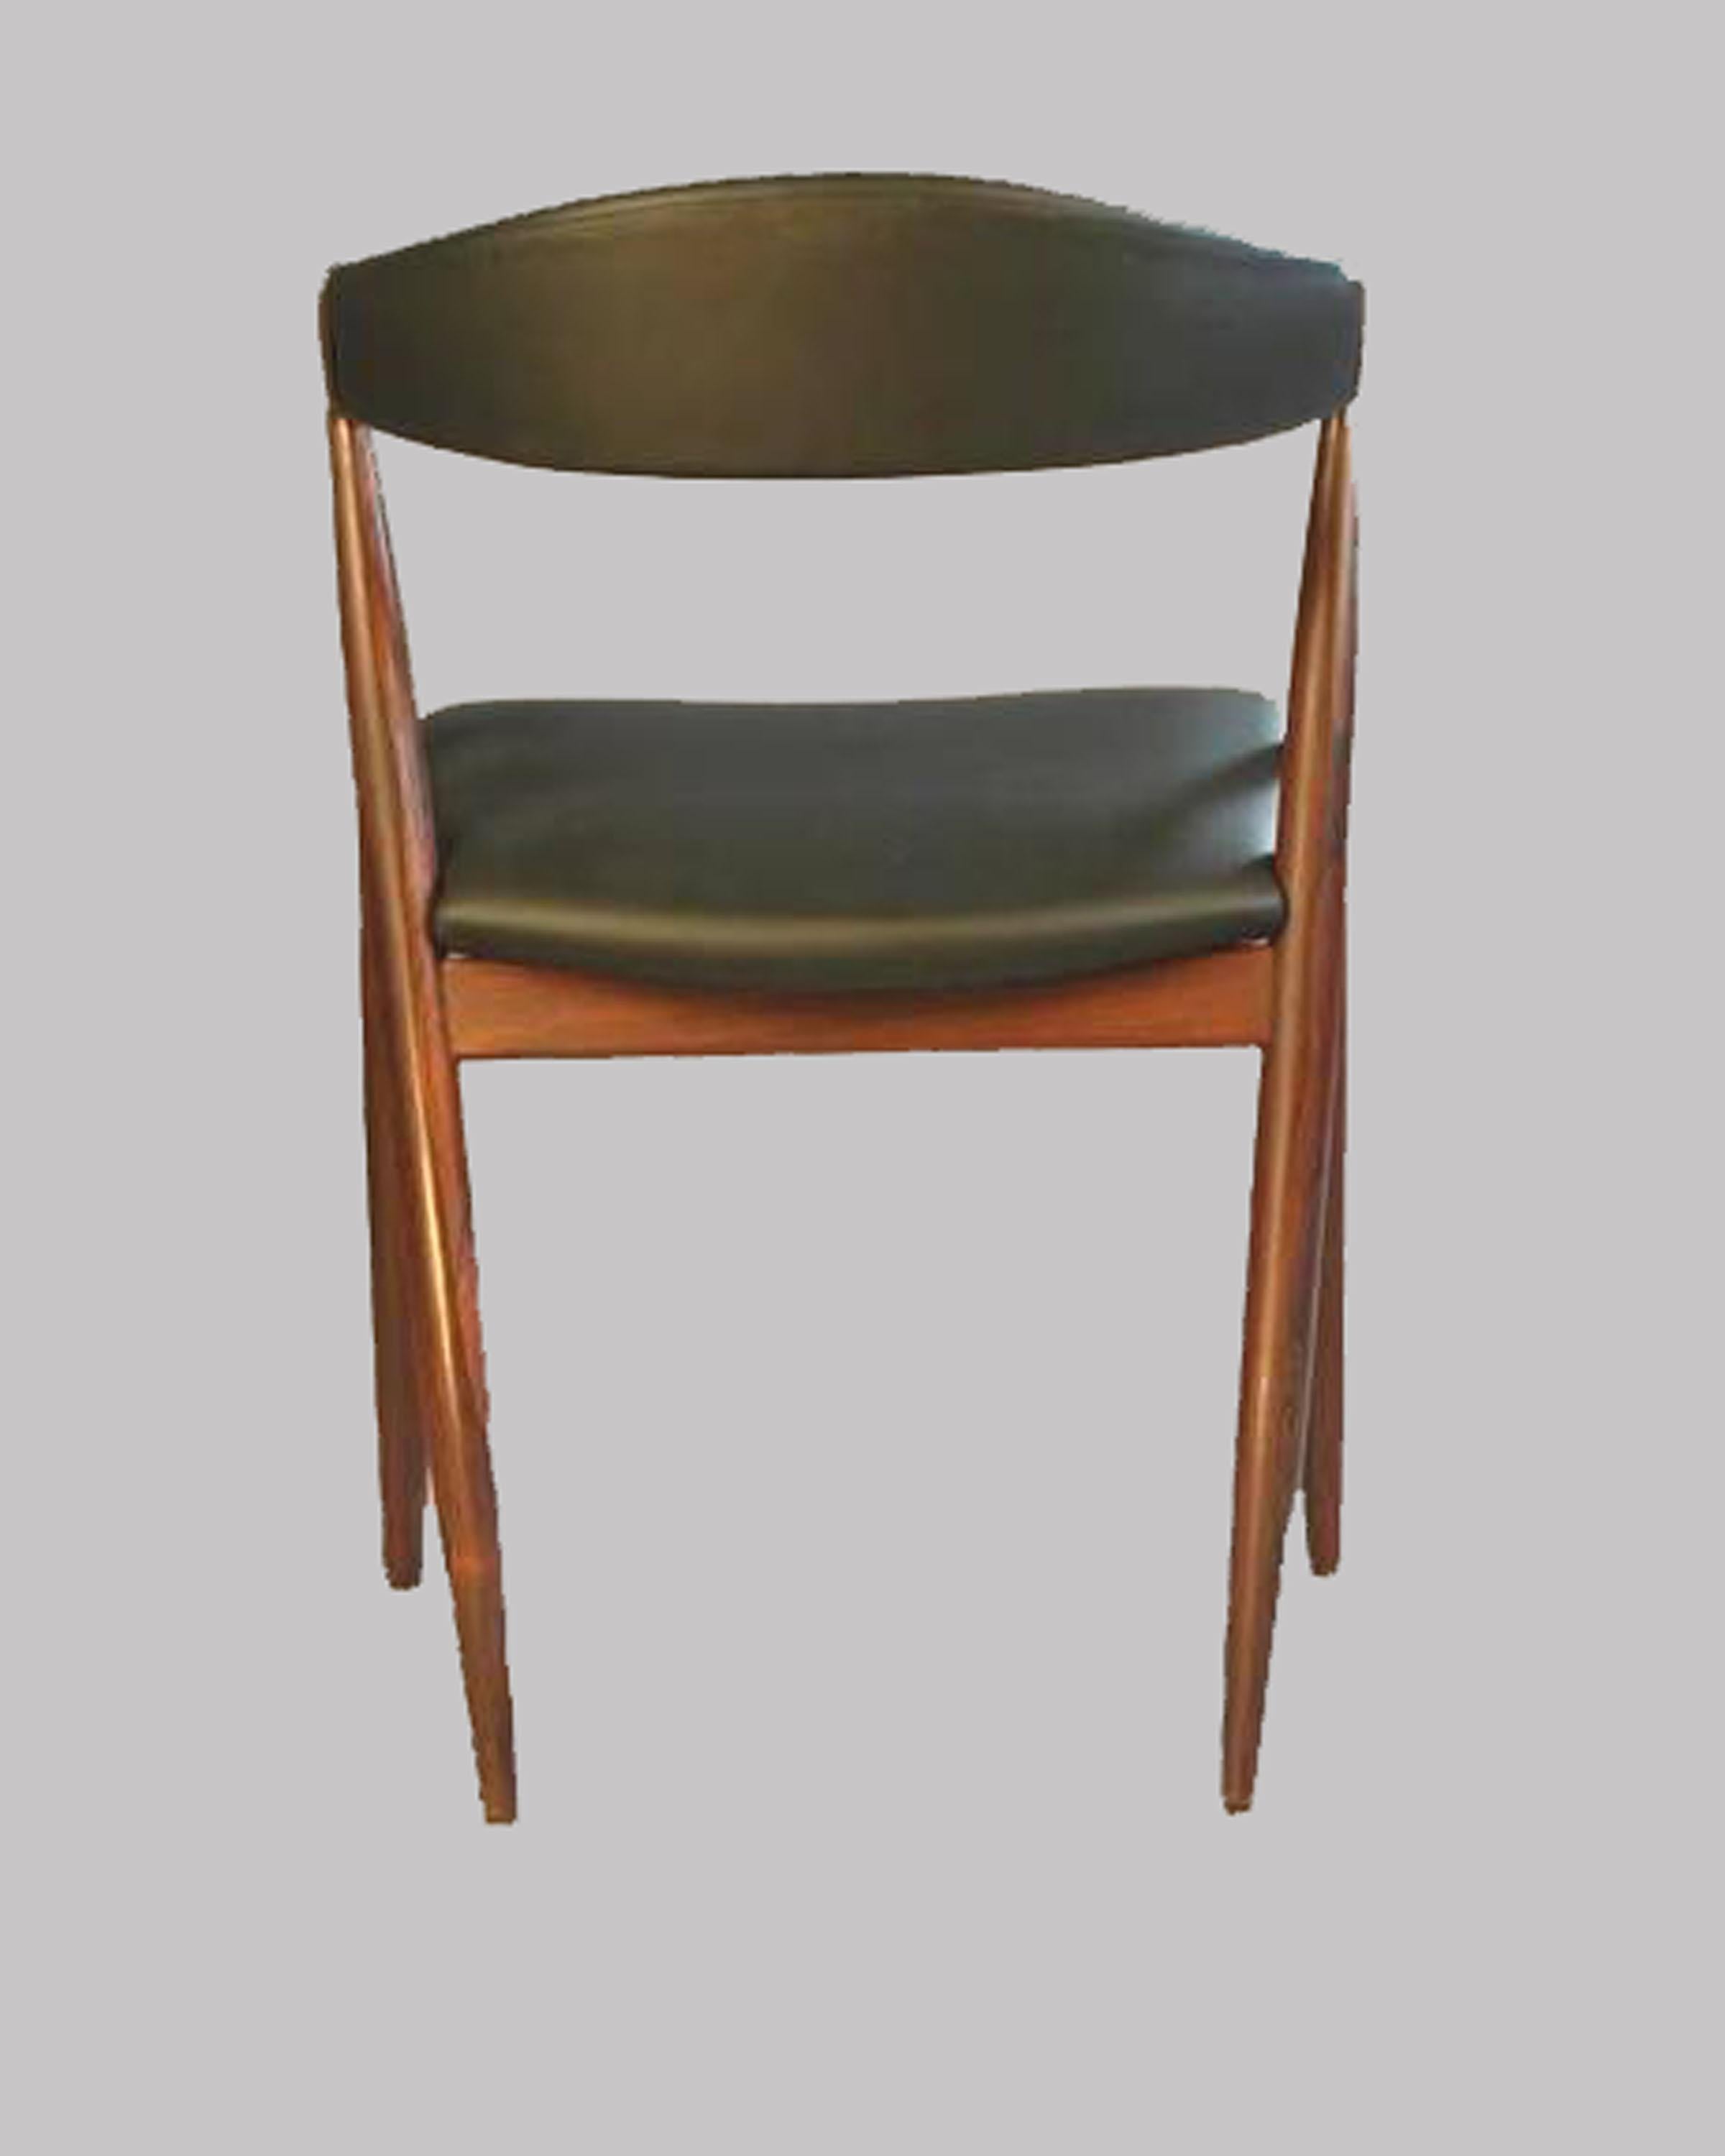 Set of eight A-frame dining chairs designed by Kai Kristiansen for Schou-Andersens Møbelfabrik. 

The chairs with their mixture of a straight lined A-frame combuned with an elegant curved backrest and seat feature Kai Kristiansens ability to